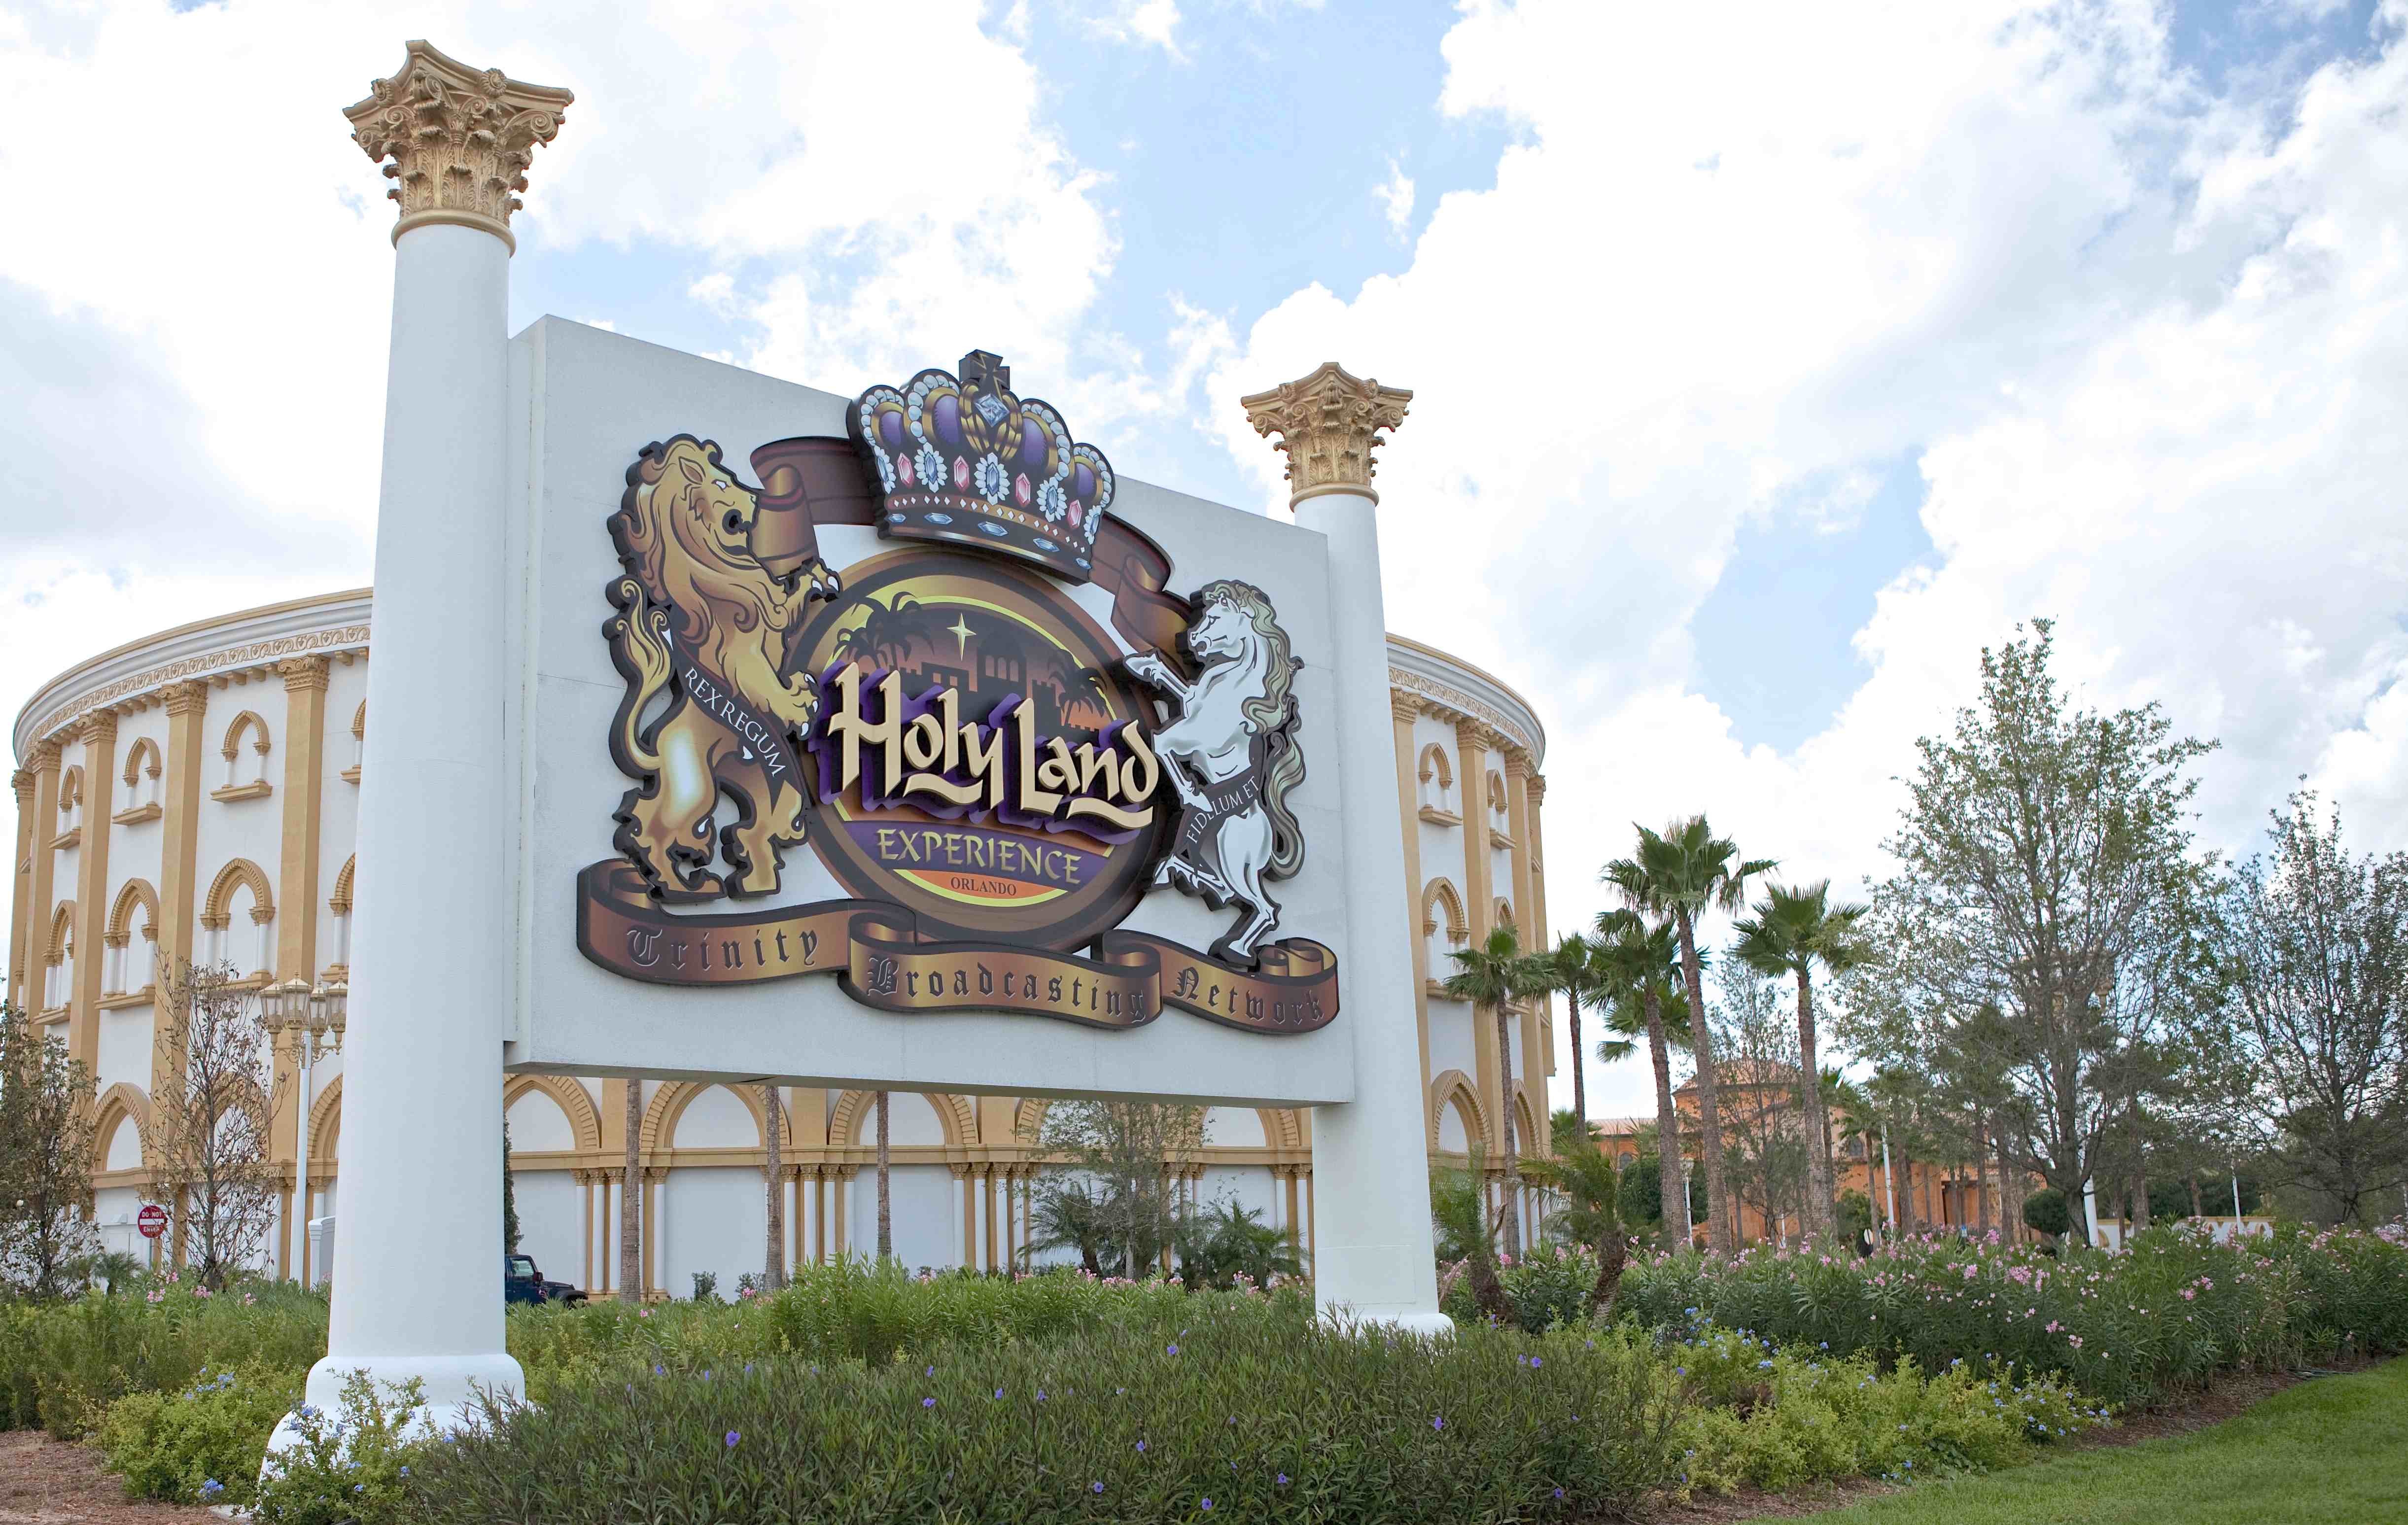 In a major overhaul, Orlando's Holy Land Experience will end all